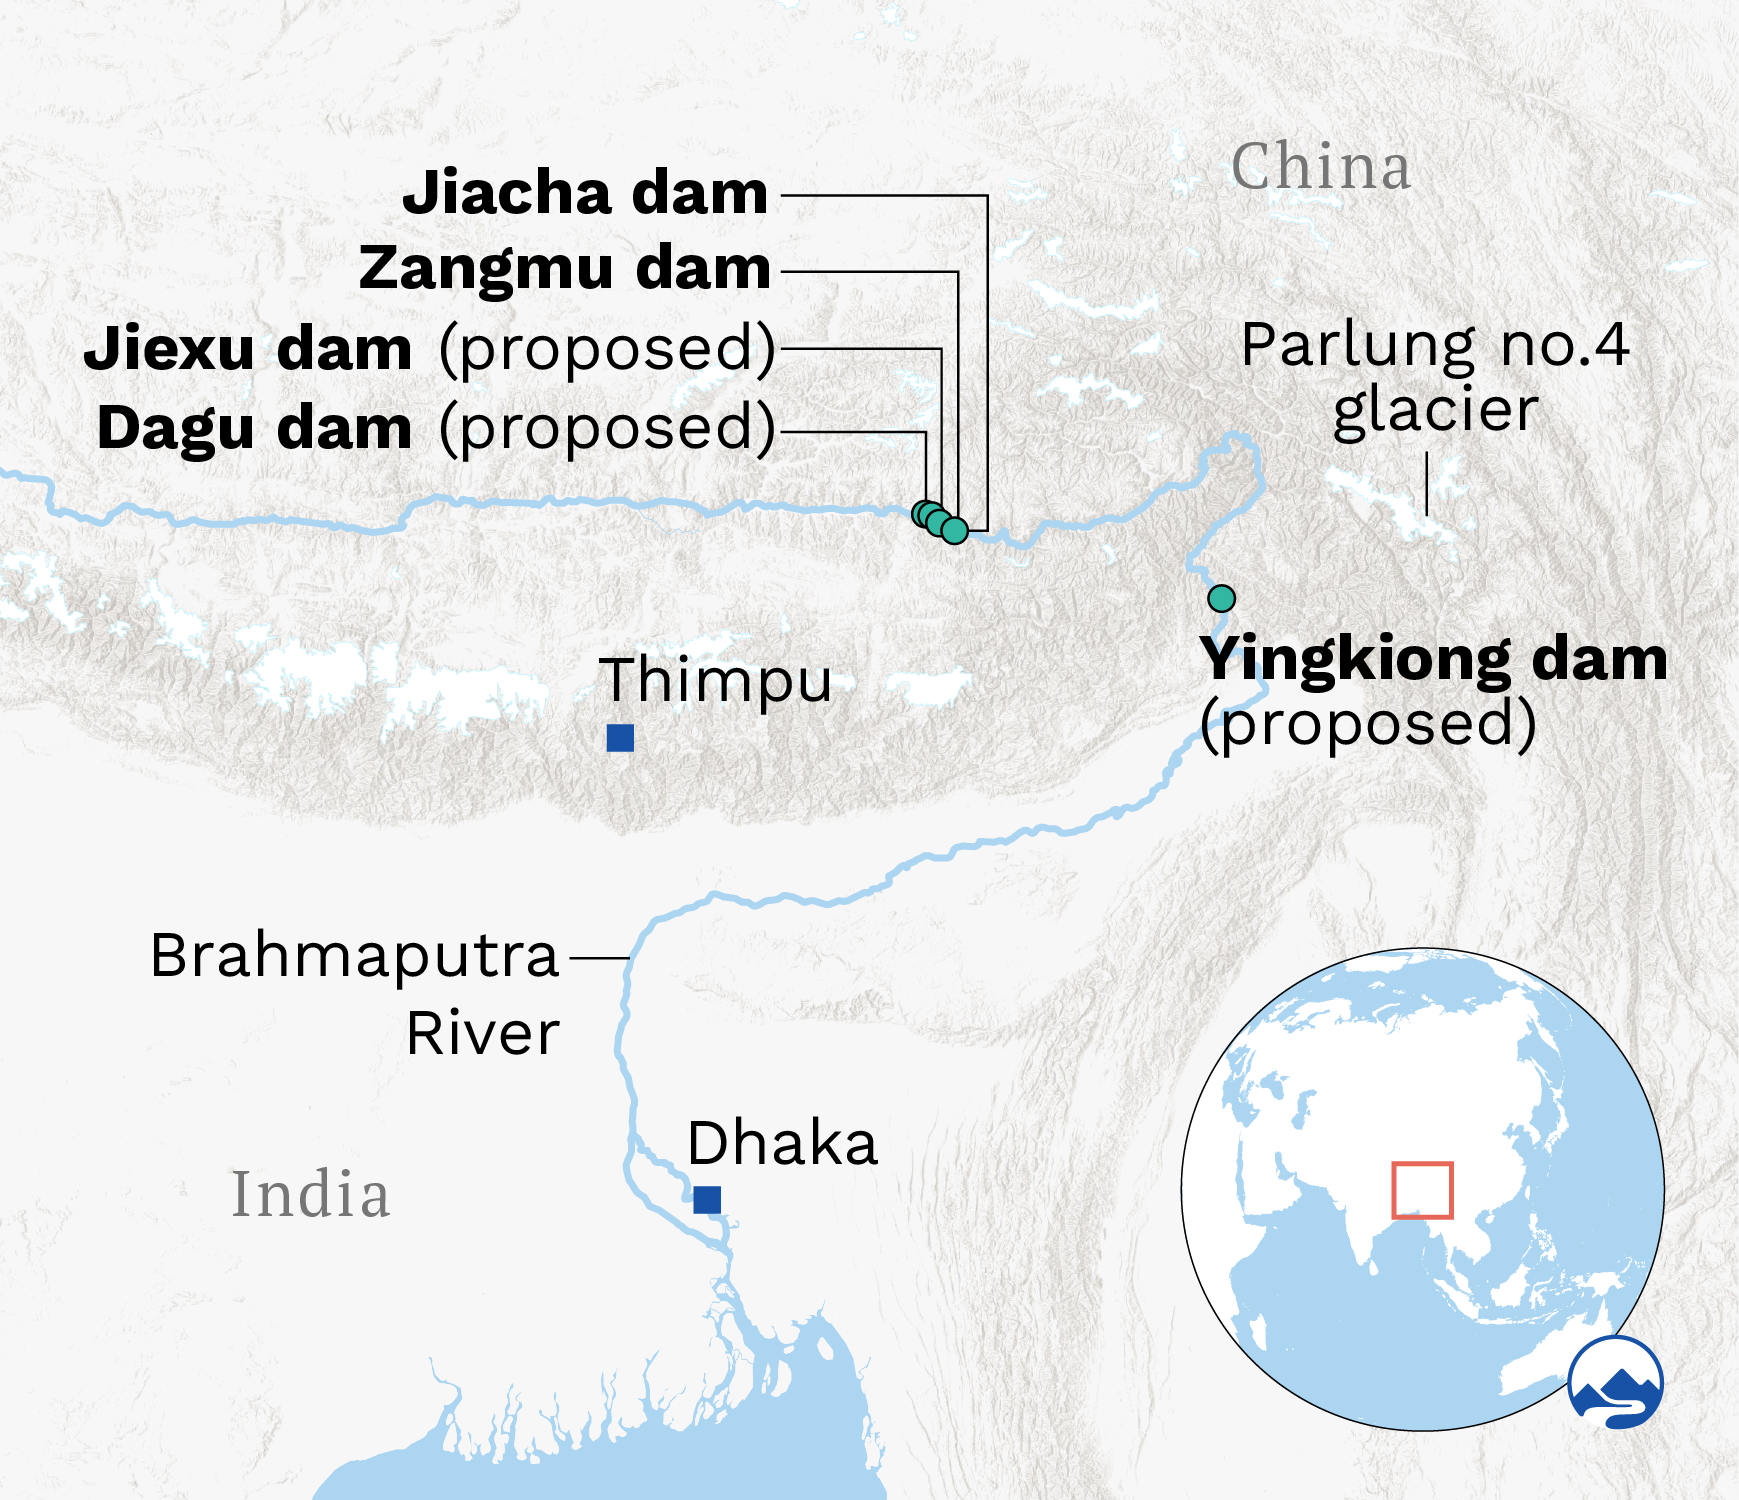 Map showing four Chinese dams and one proposed Indian dam on the Brahmaputra river, South Asia Himalayas